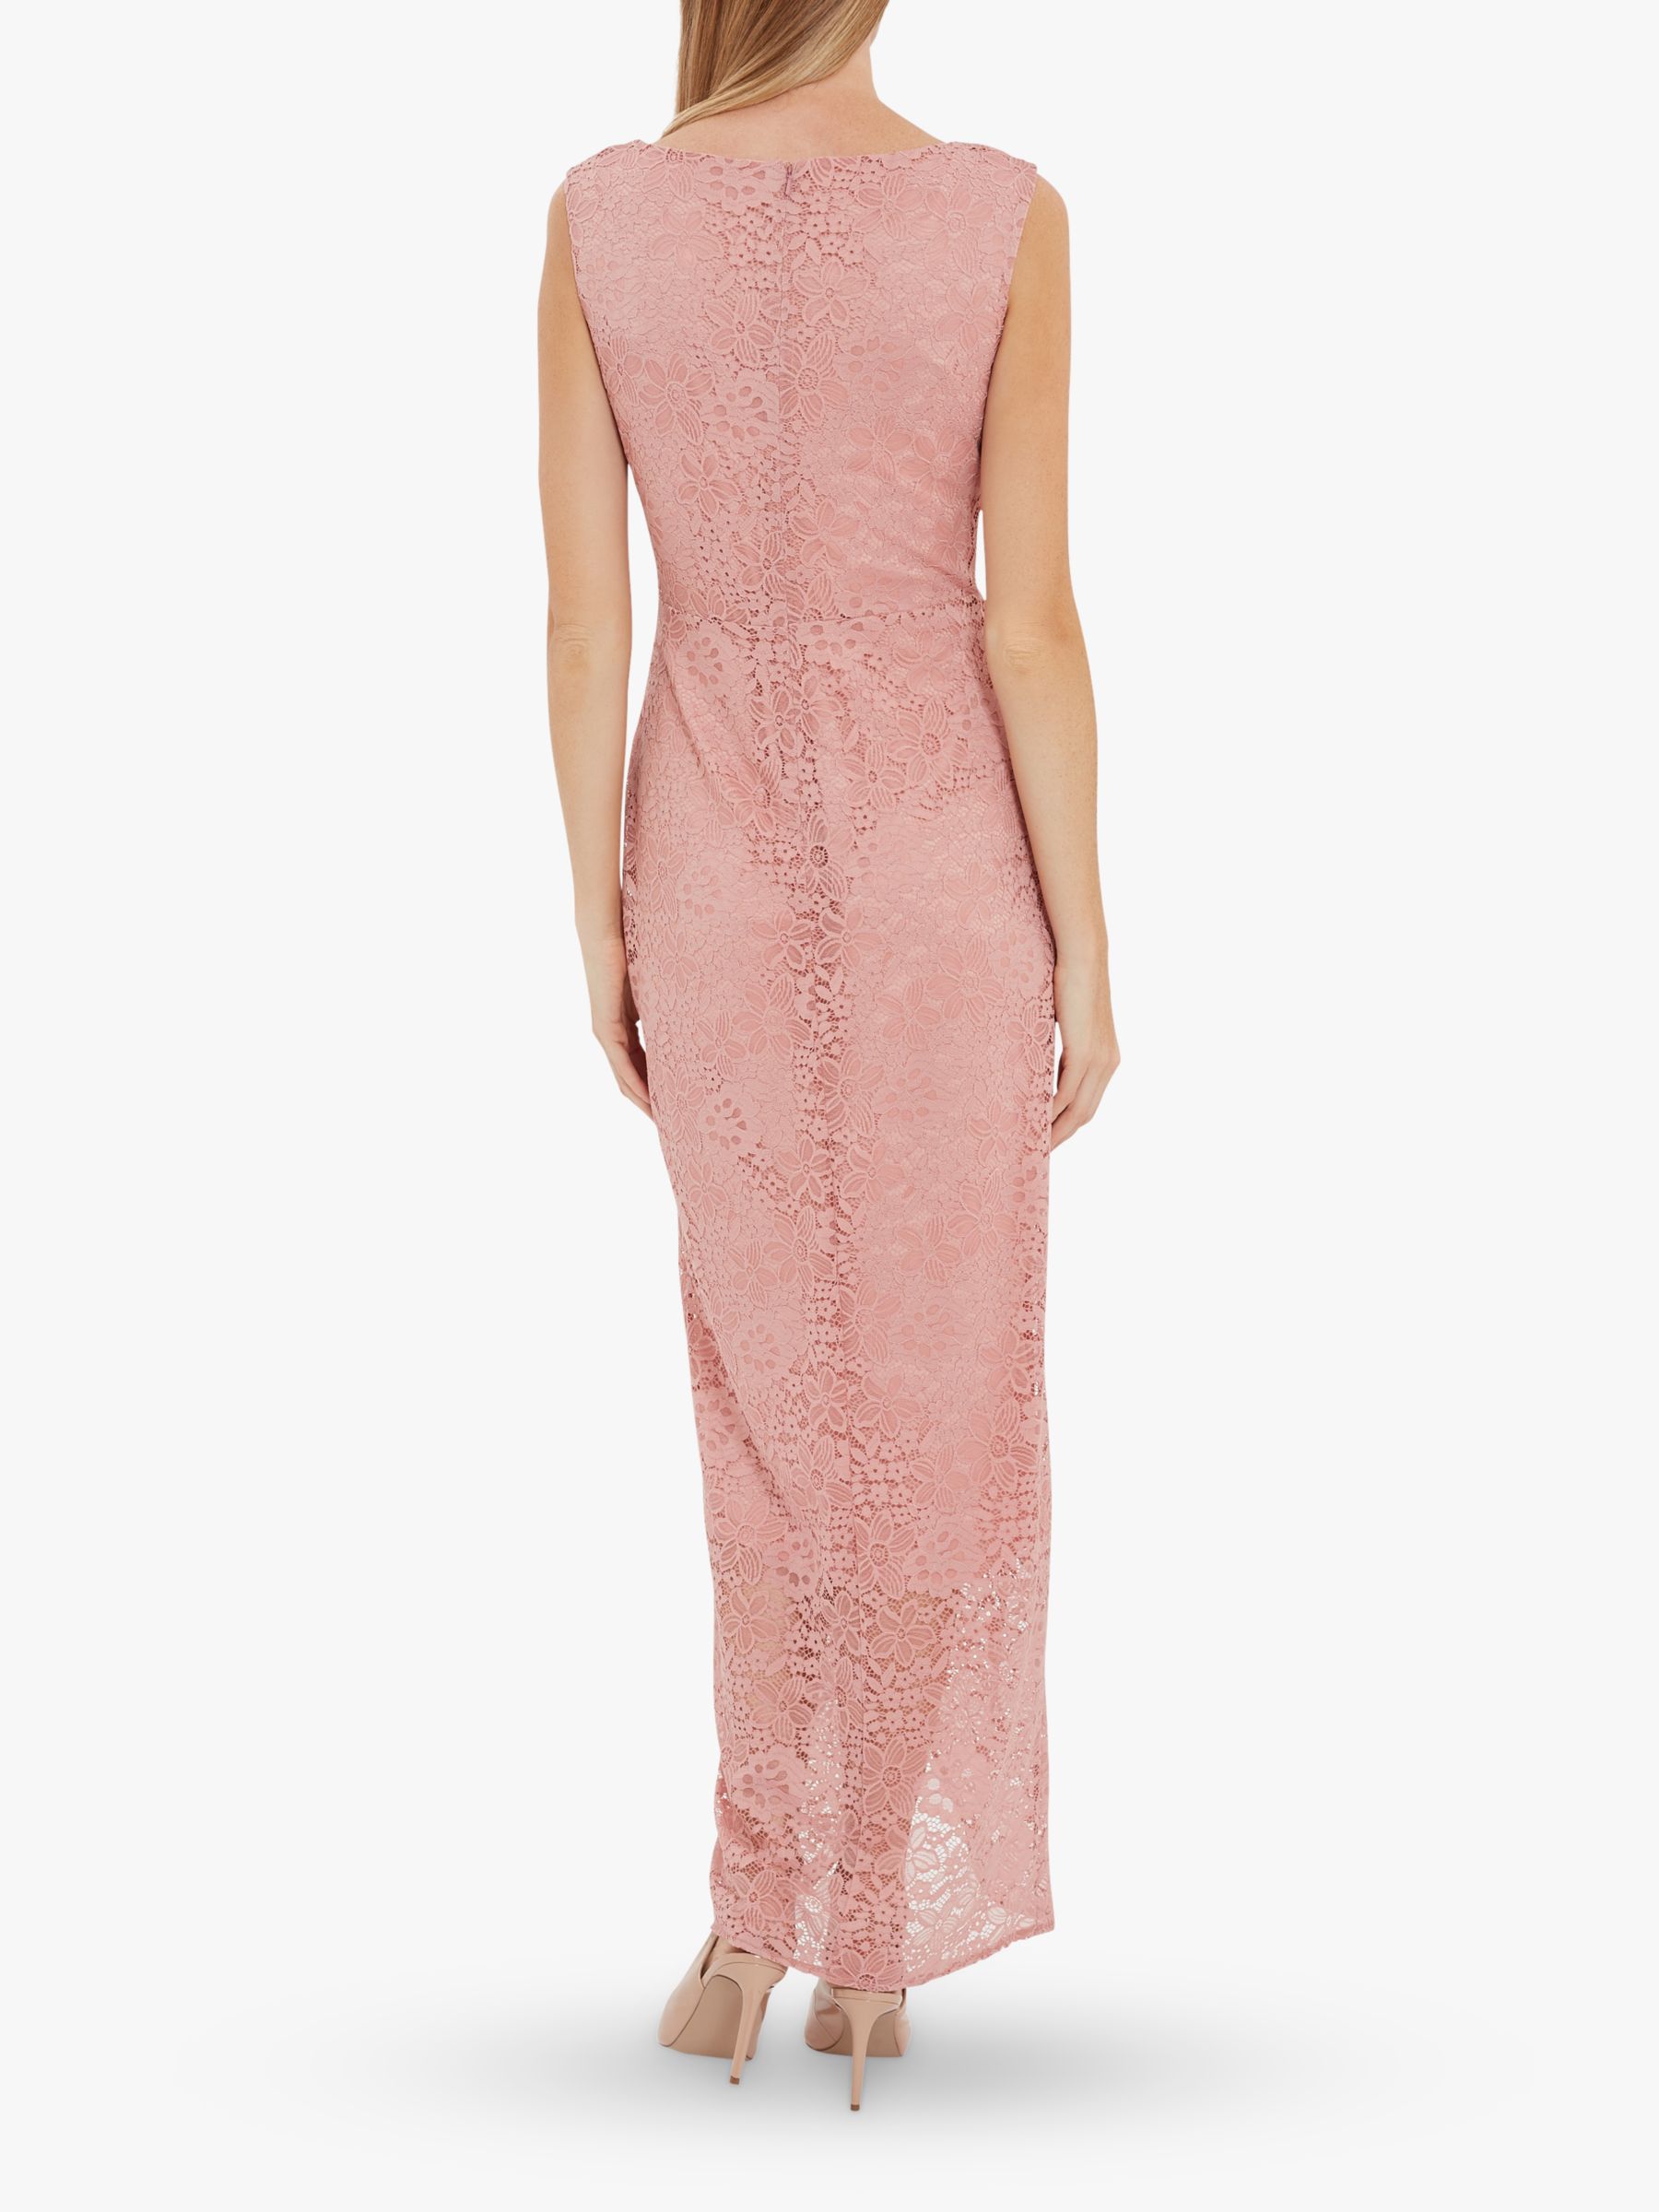 Buy Gina Bacconi Leven Stretch Lace Dress Online at johnlewis.com